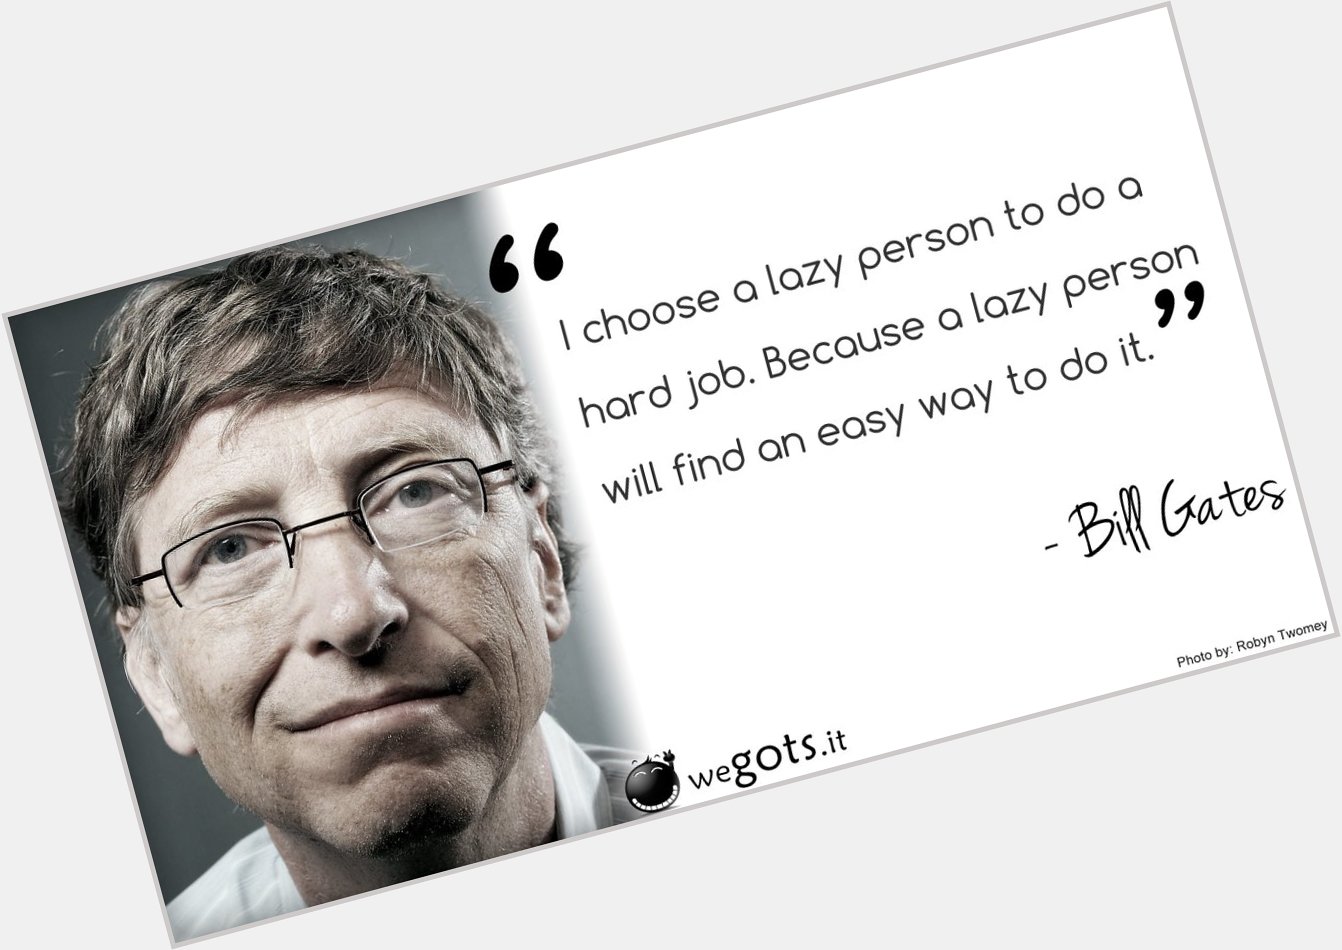 Happy Birthday to Bill Gates, 59 today. Thank you for sharing the :-) 